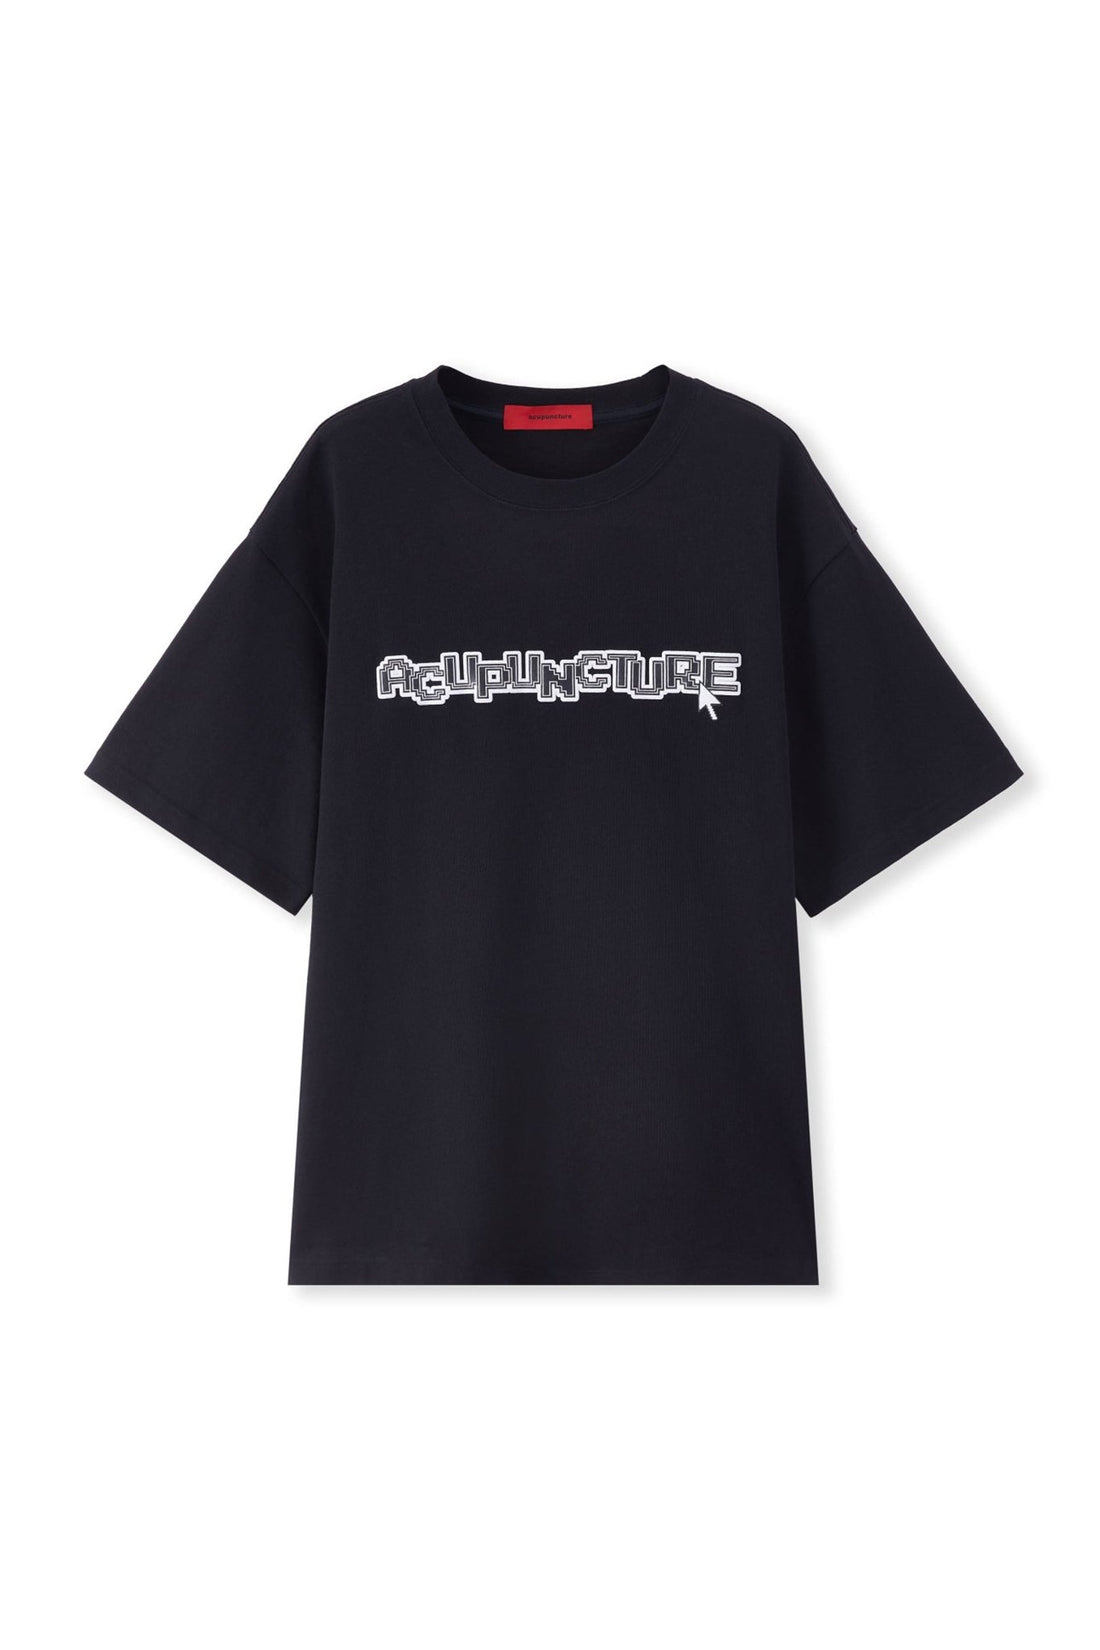 GOOD MORNING BEAUTY T-SHIRT BLACK Acupuncture